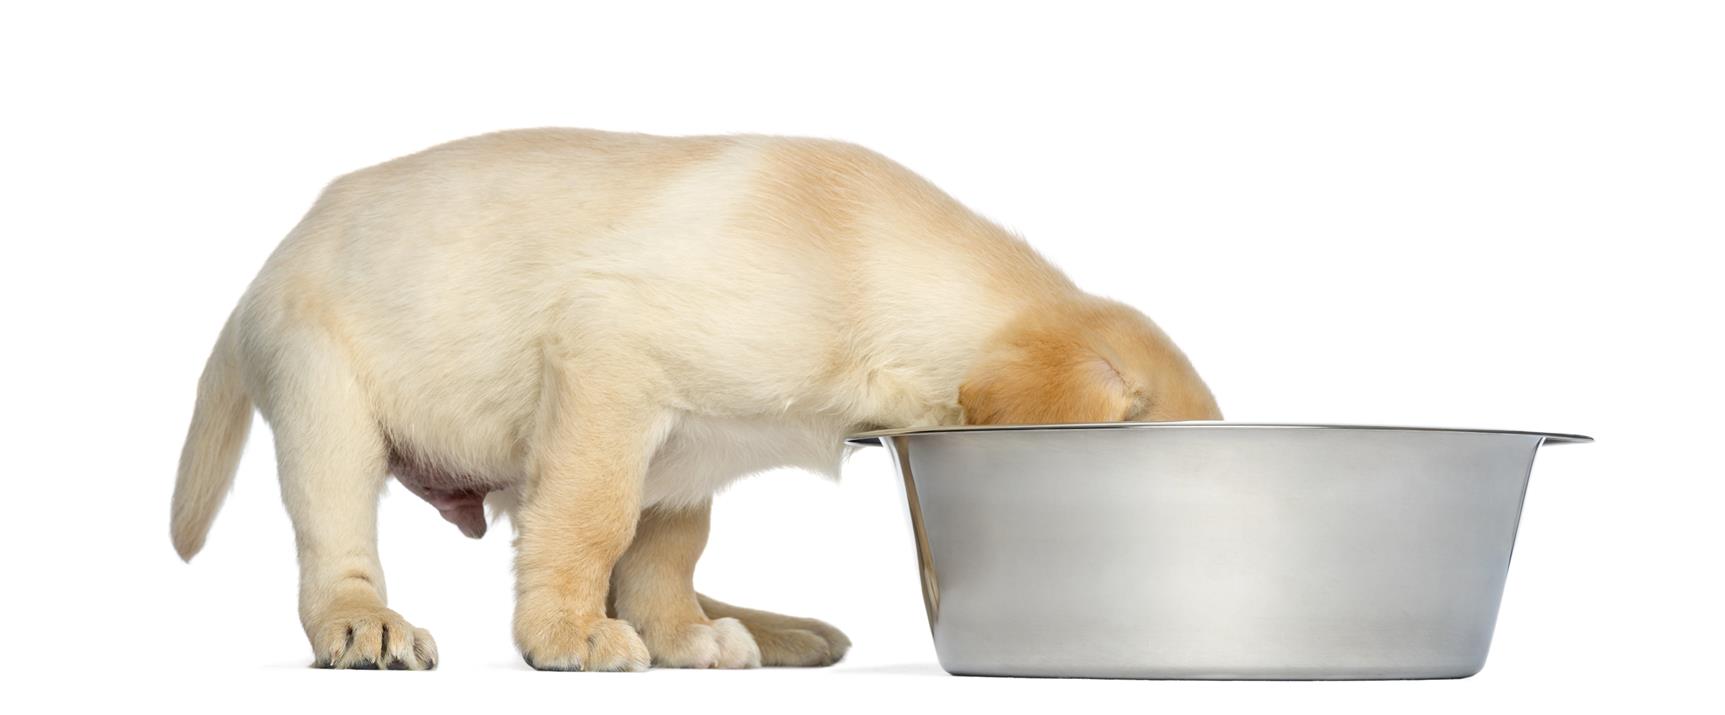 Labrador Retriever Puppy, 2 months old, with head in a big dog bowl, isolated on white